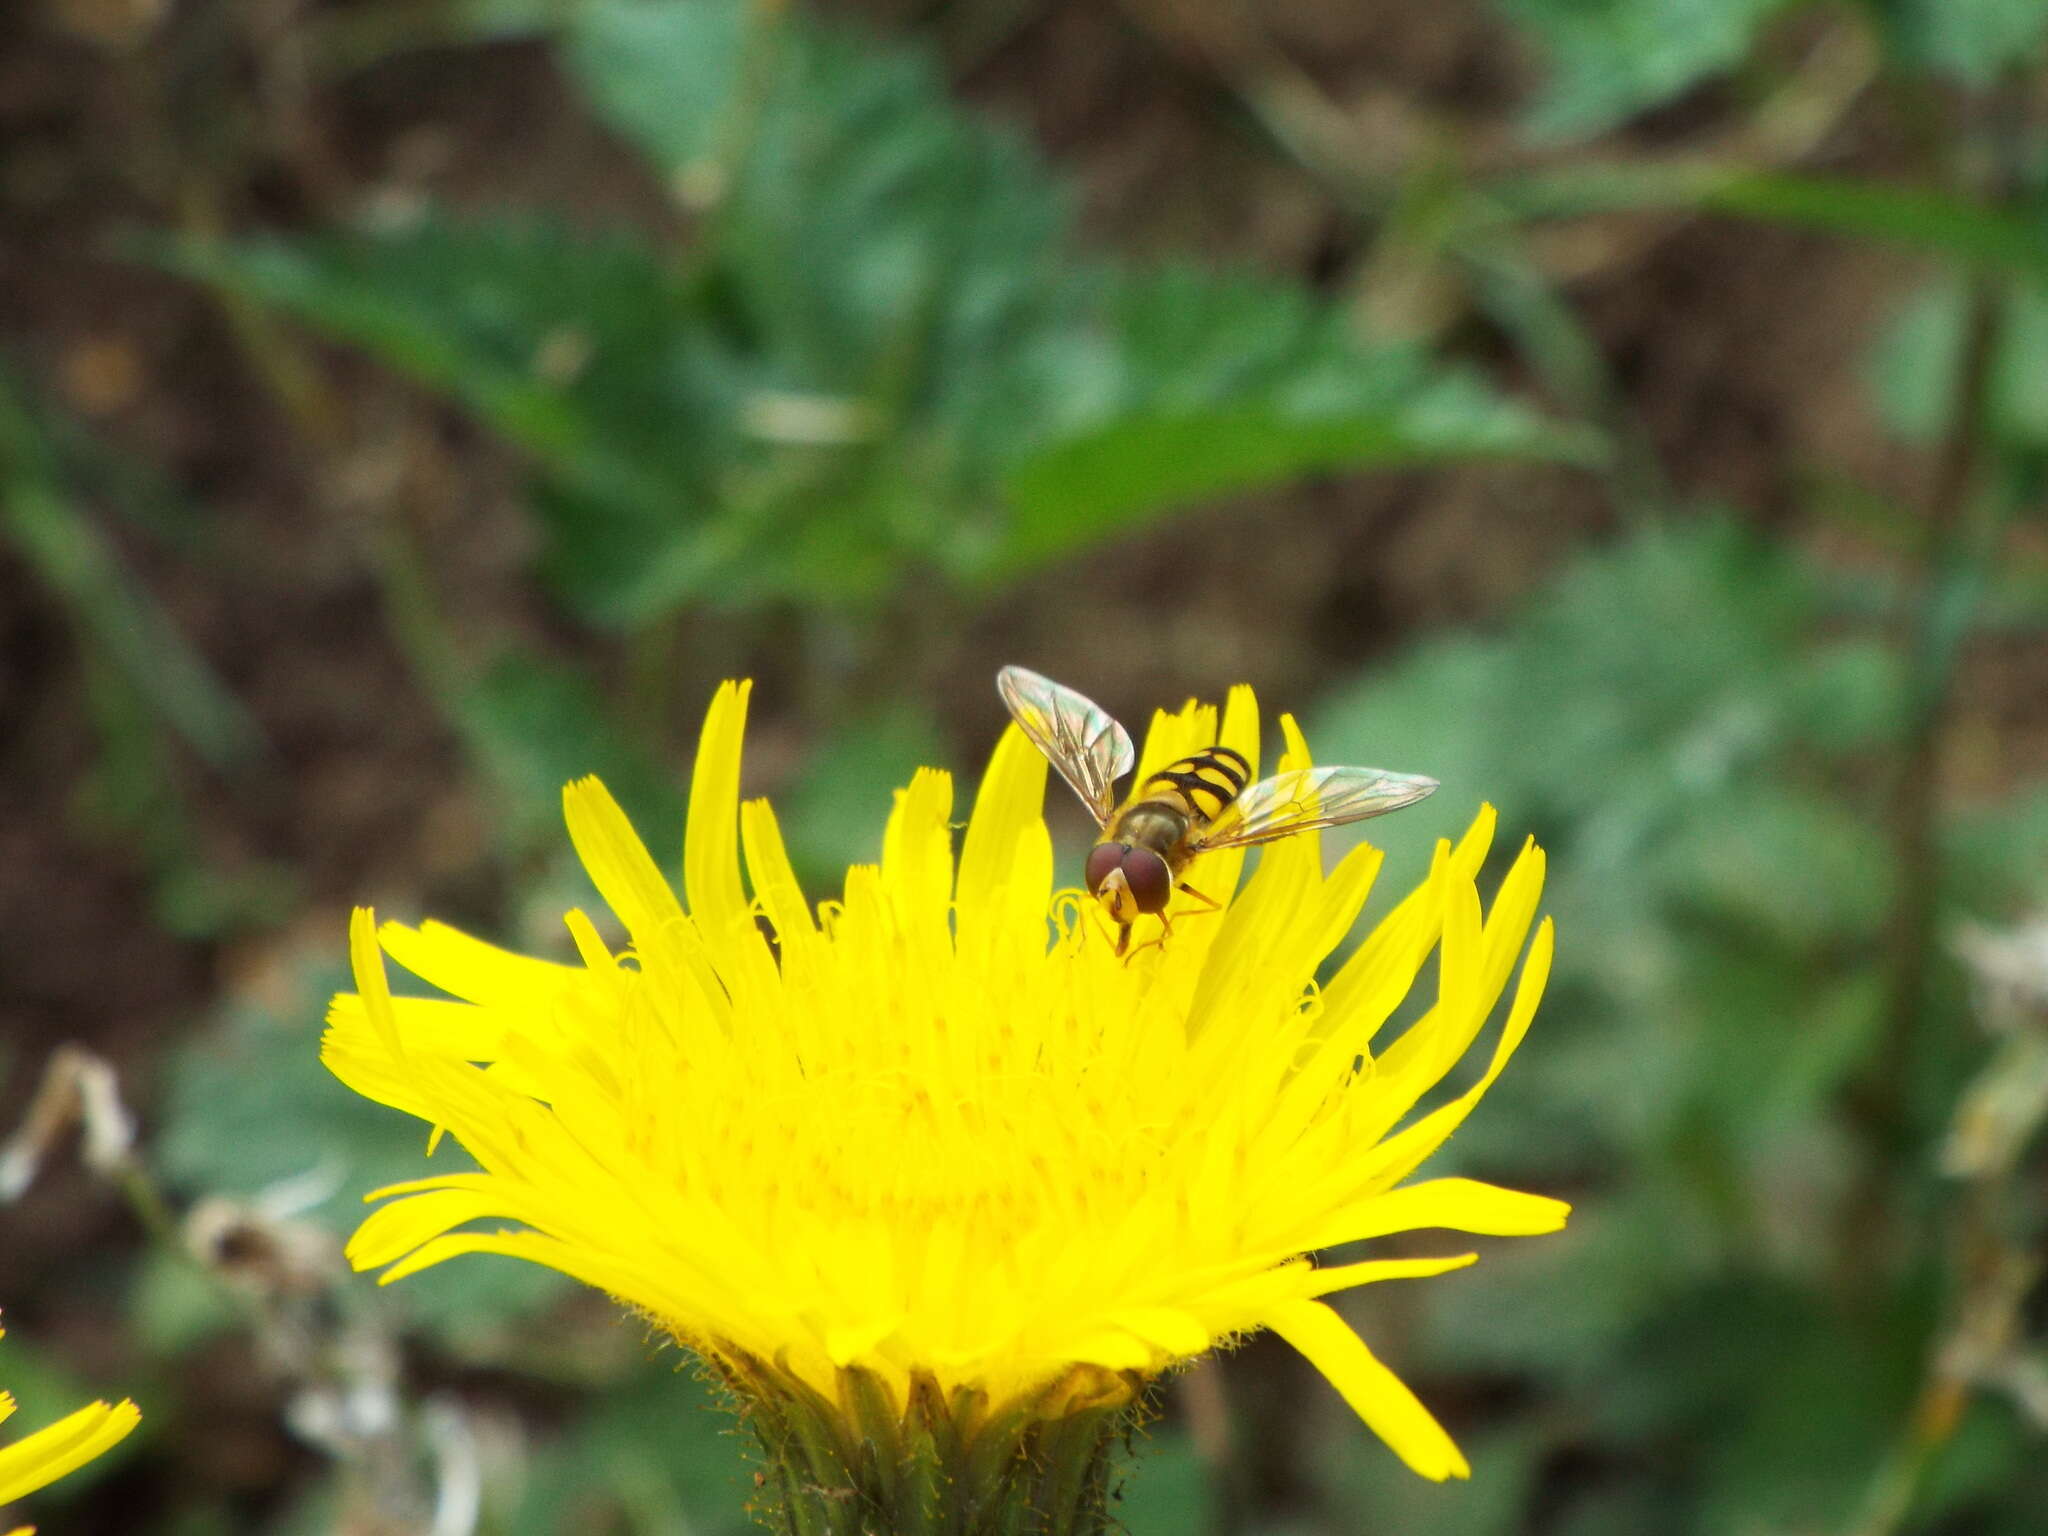 Image of Common Banded Hoverfly